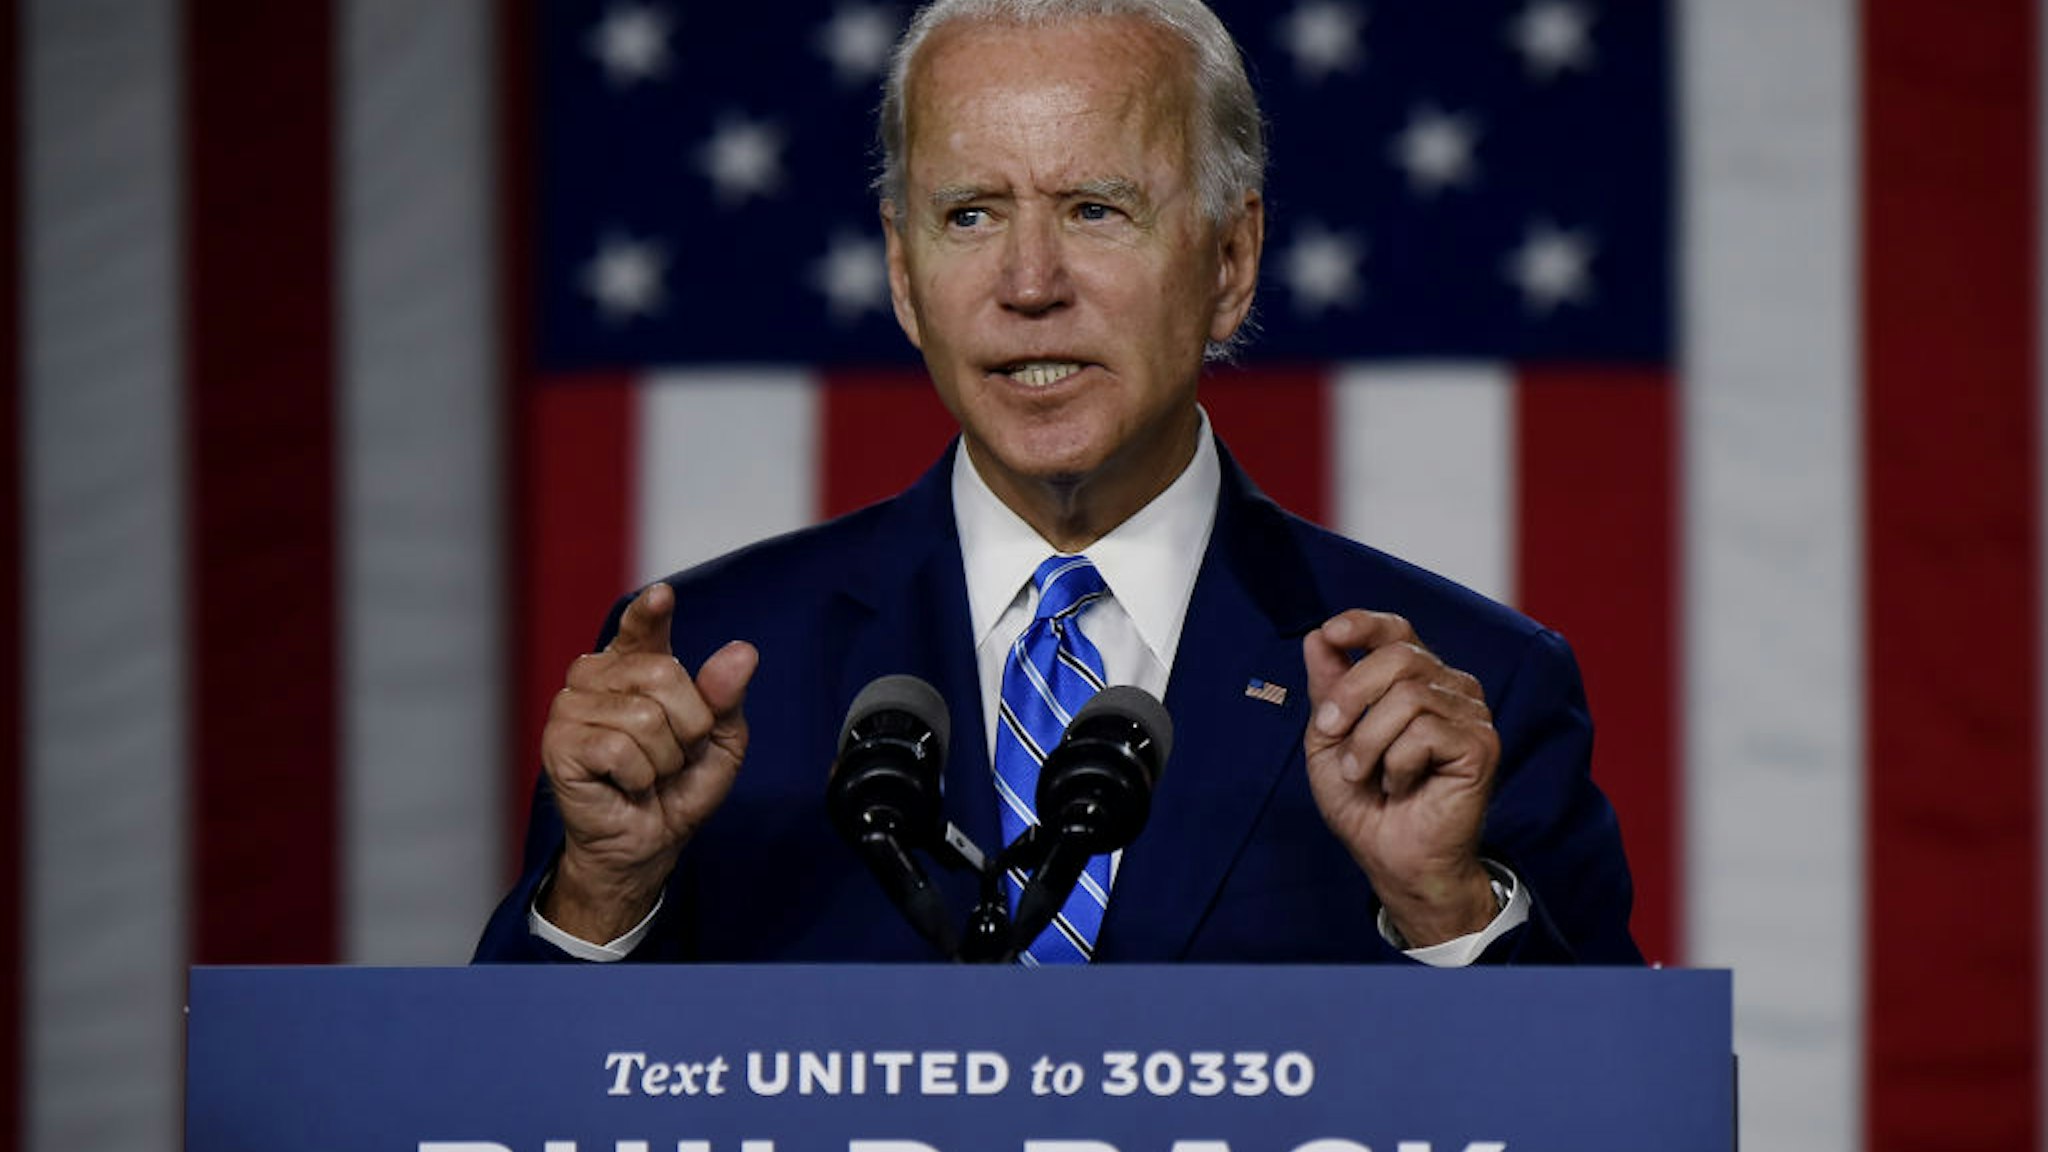 Democratic presidential candidate and former Vice President Joe Biden speaks at a "Build Back Better" Clean Energy event on July 14, 2020 at the Chase Center in Wilmington, Delaware.